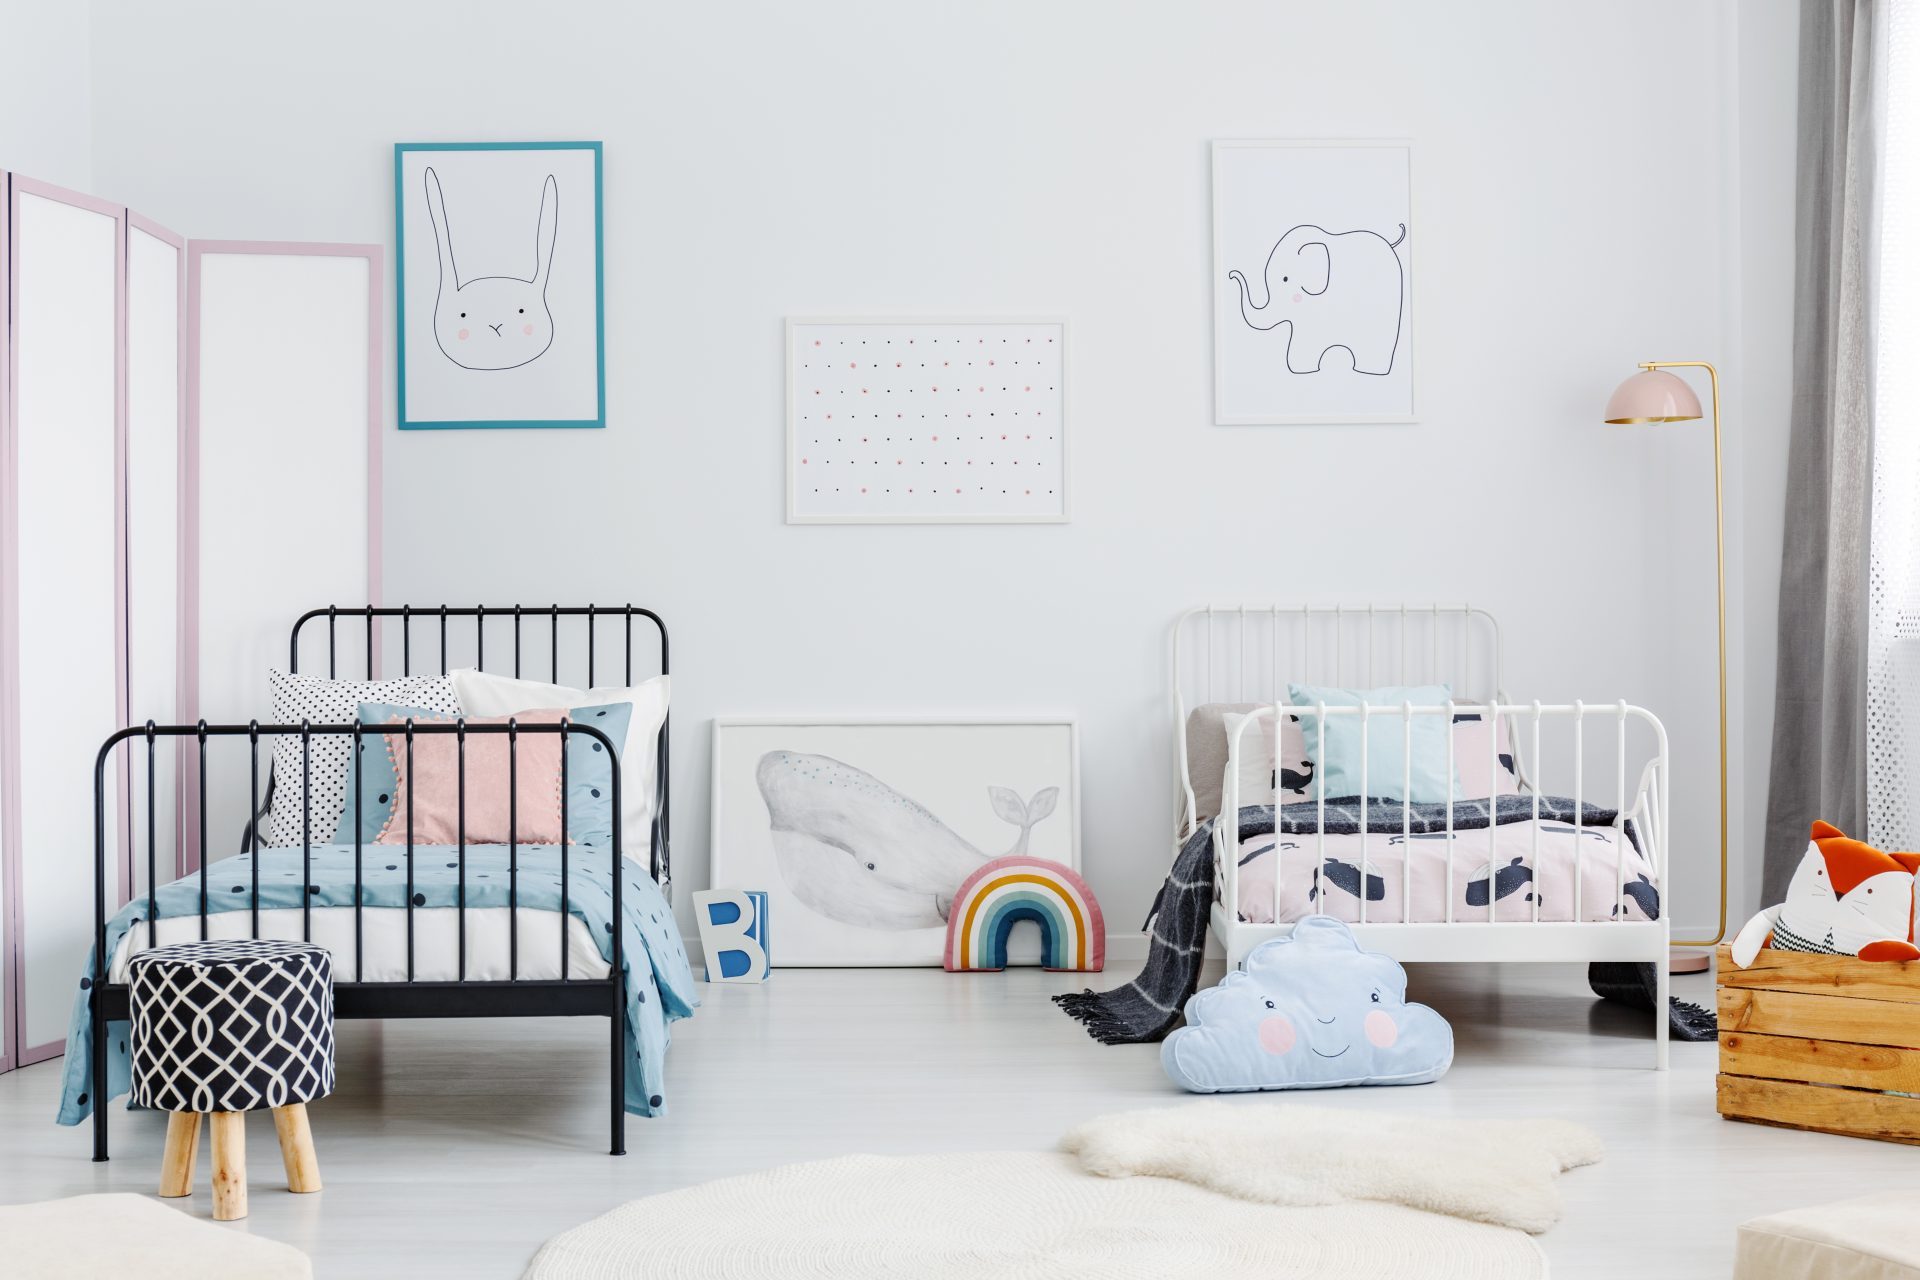 Shared bedroom ideas: How to design a shared kids’ room